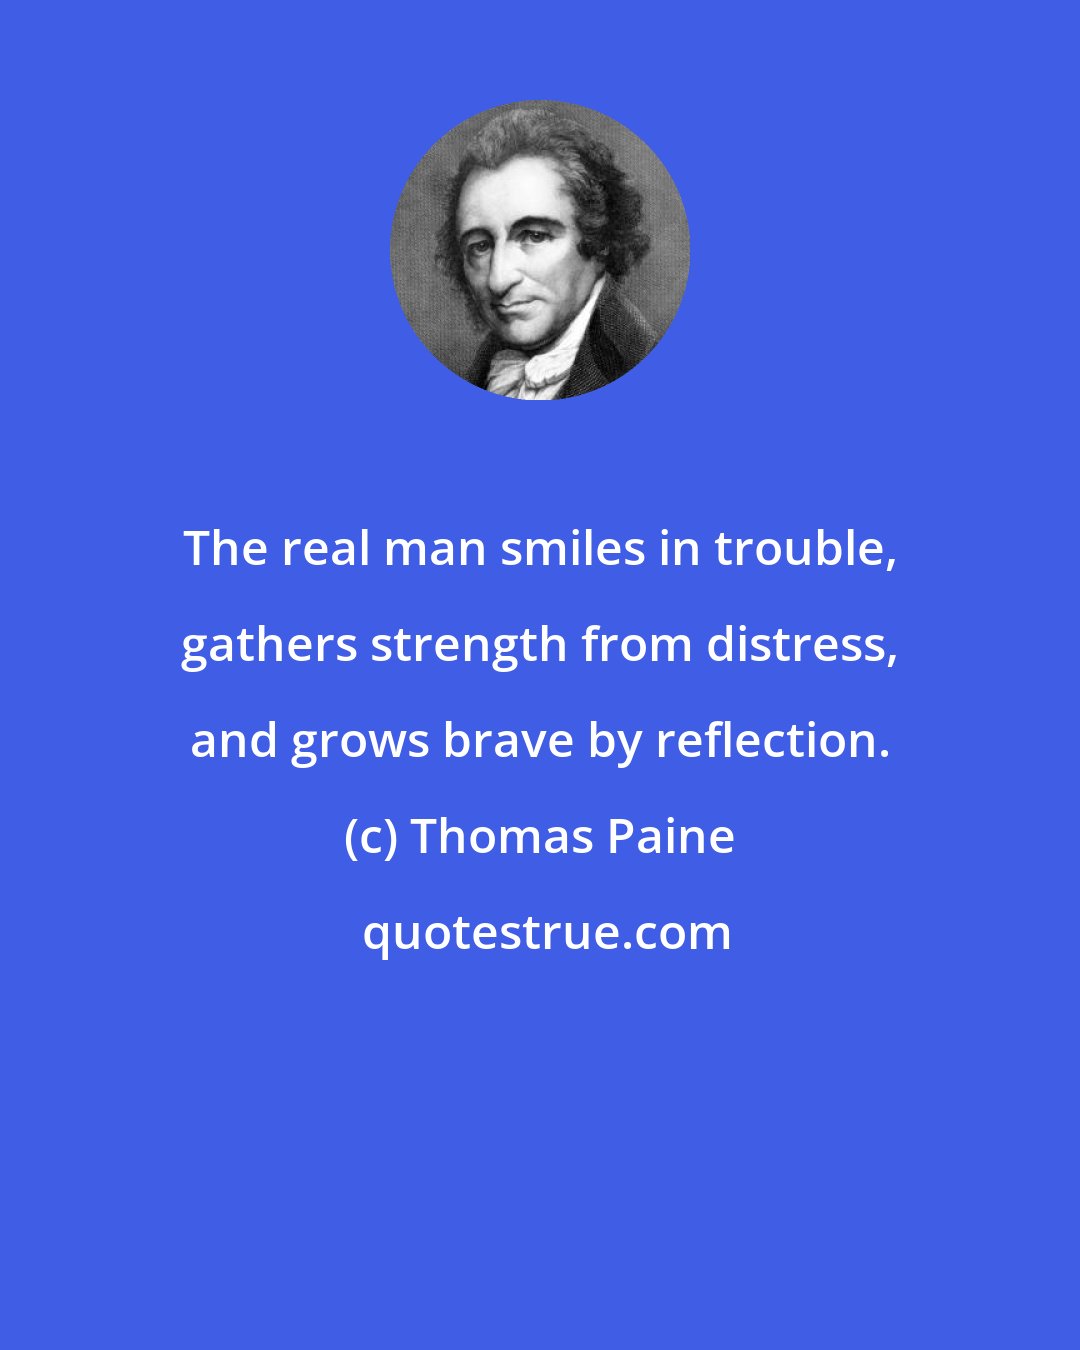 Thomas Paine: The real man smiles in trouble, gathers strength from distress, and grows brave by reflection.